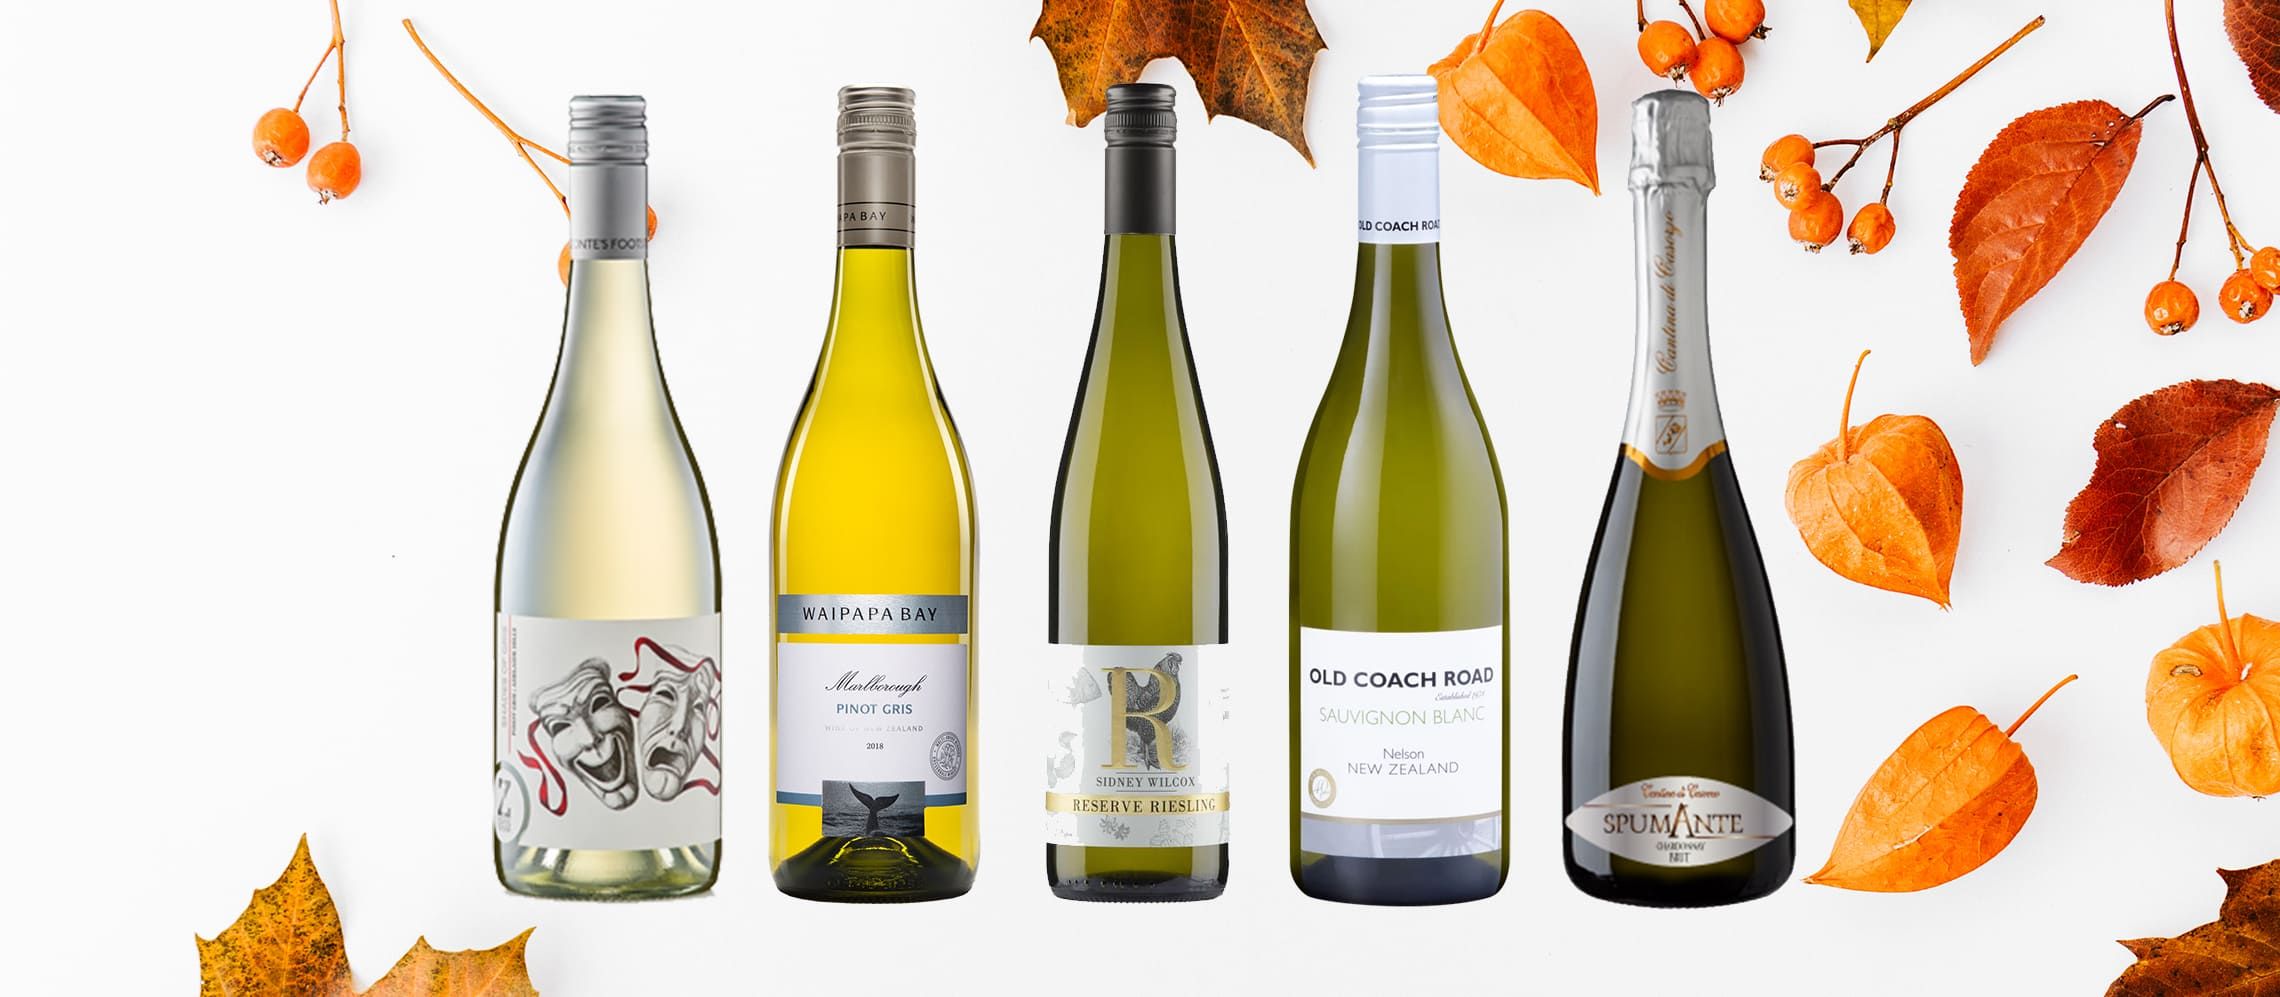 Photo for: 10 White Wines to Serve for Thanksgiving